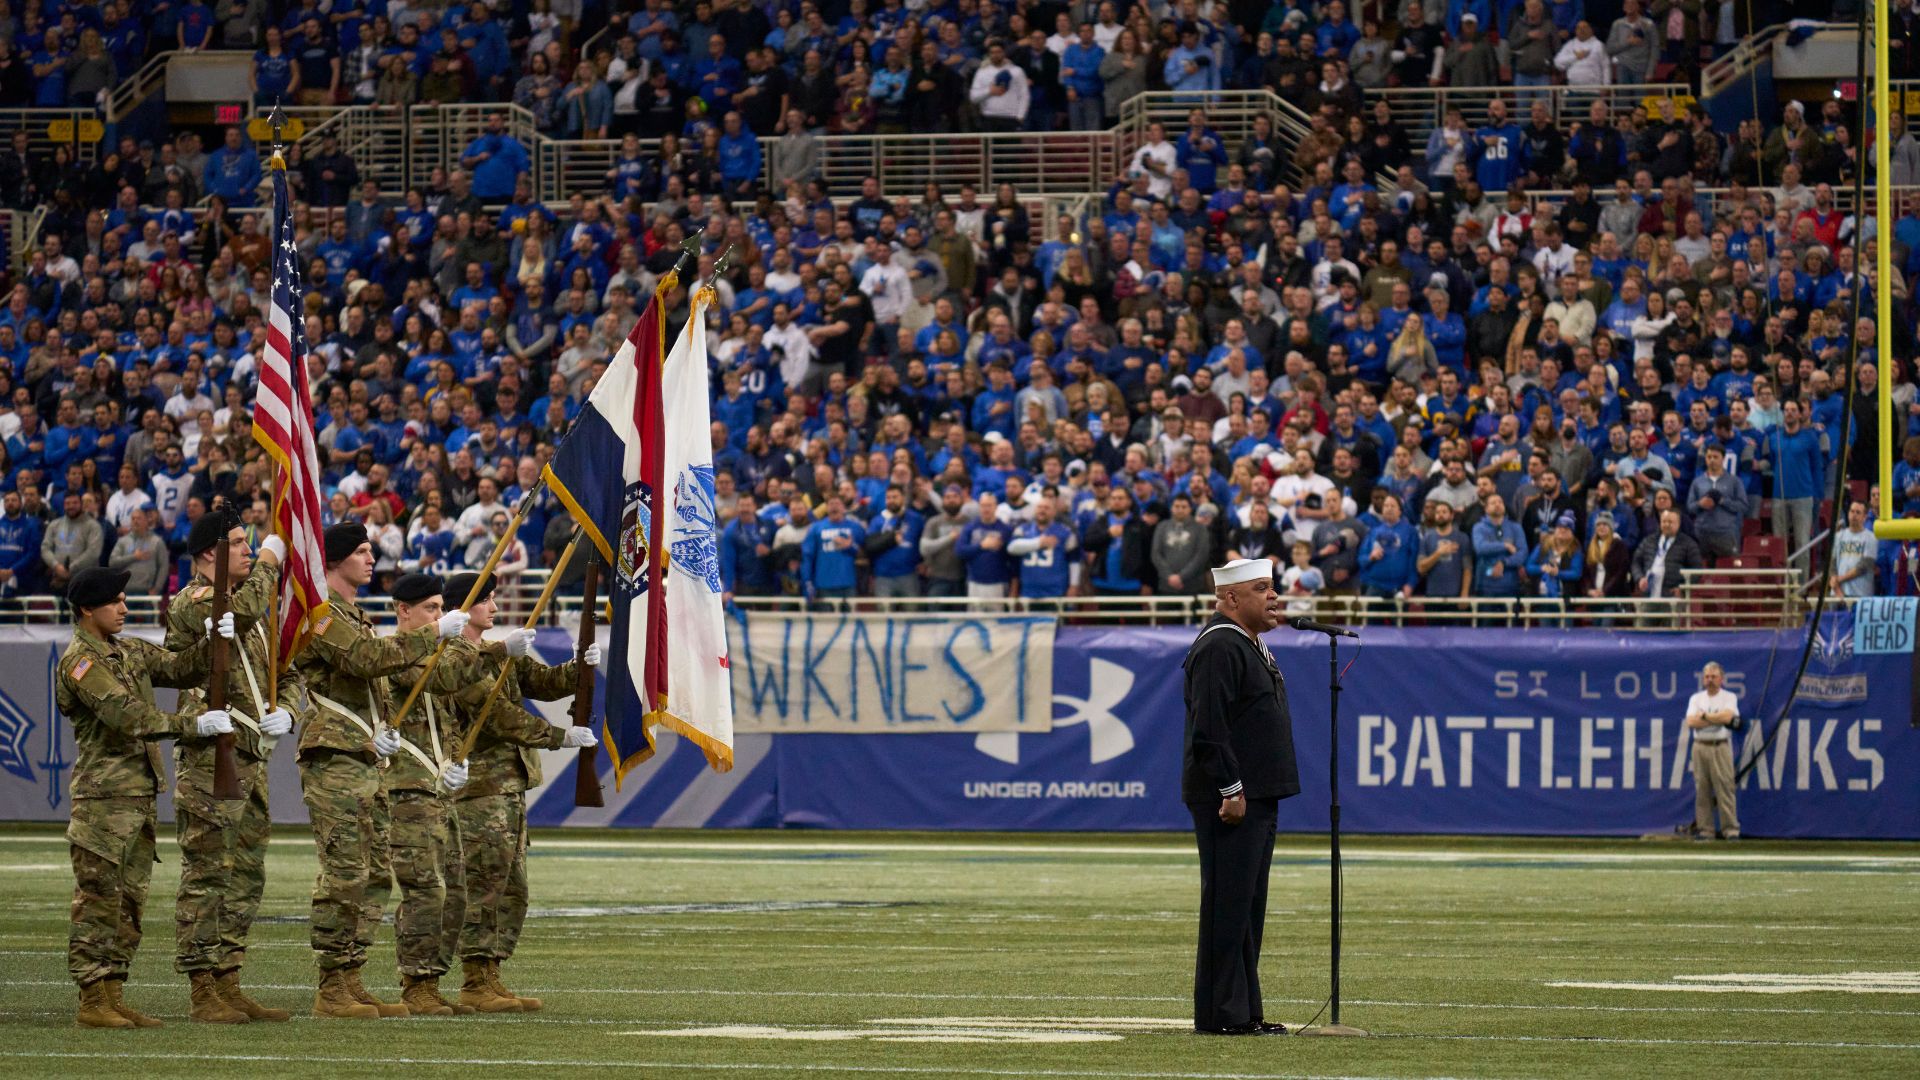 The National Anthem is sung at a St. Louis Battlehawks game.